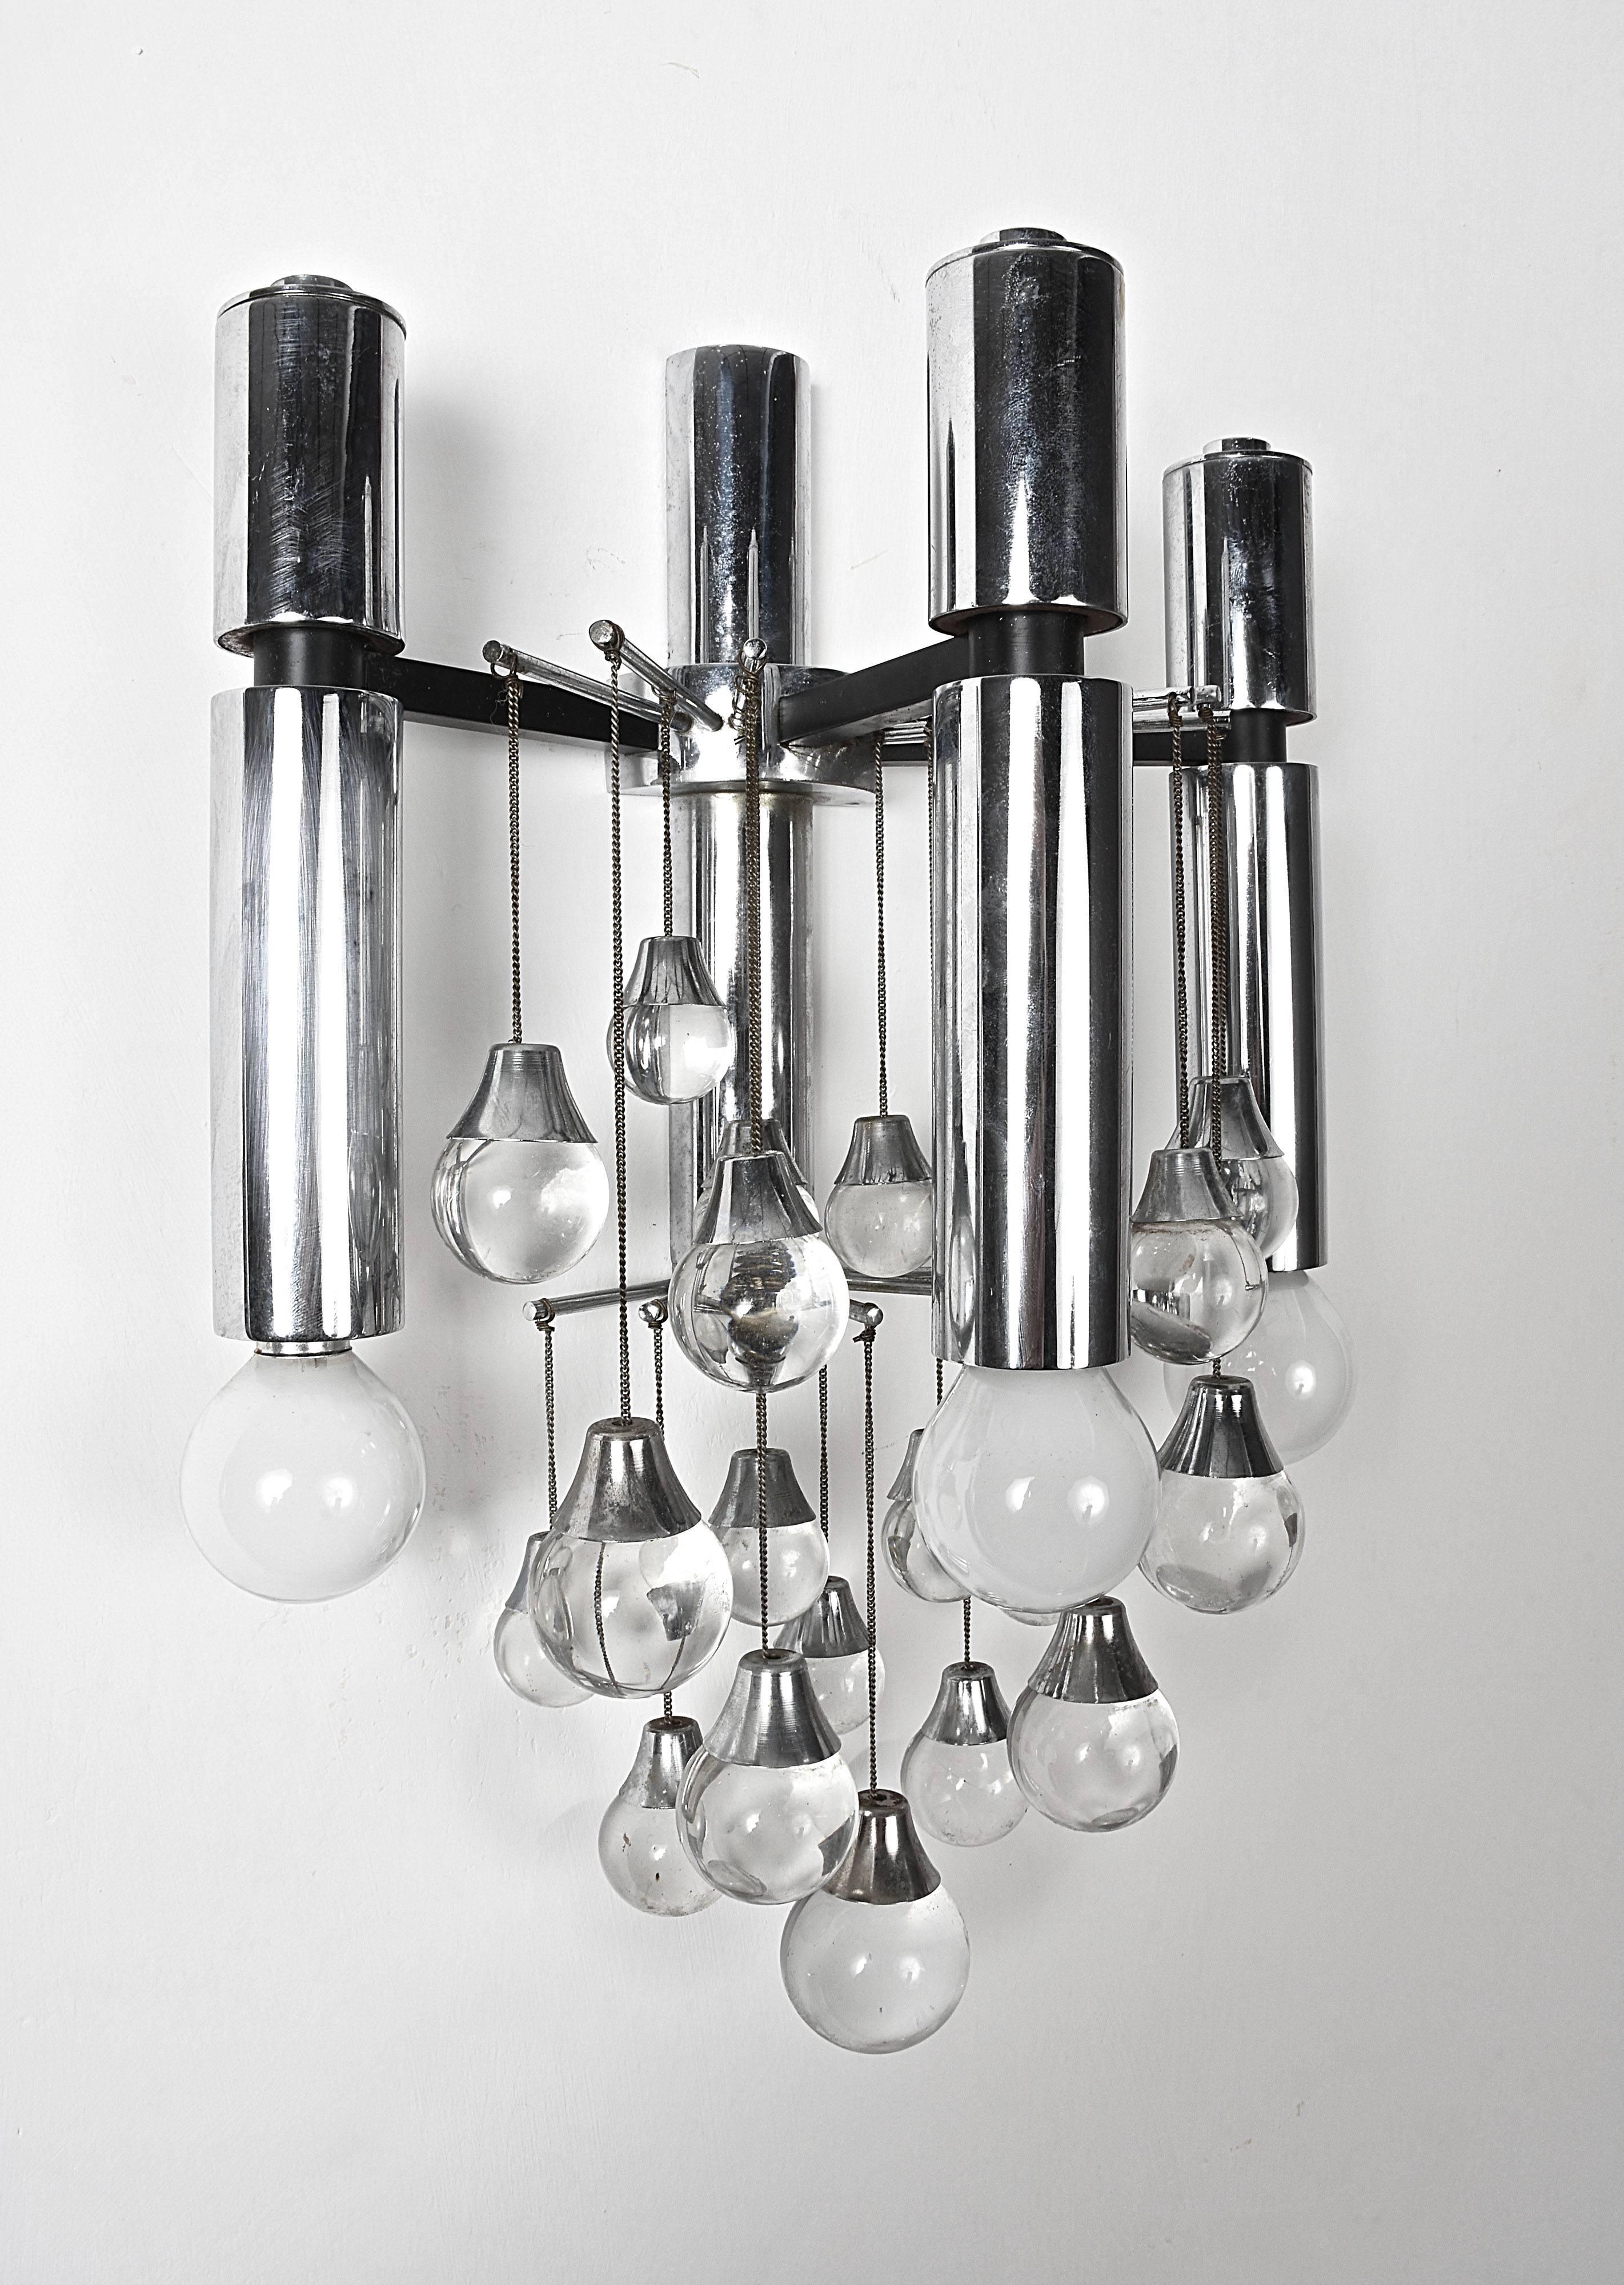 Pair of Sciolari Chrome and Glass Italian Sconces with Three Lights, 1960s For Sale 1